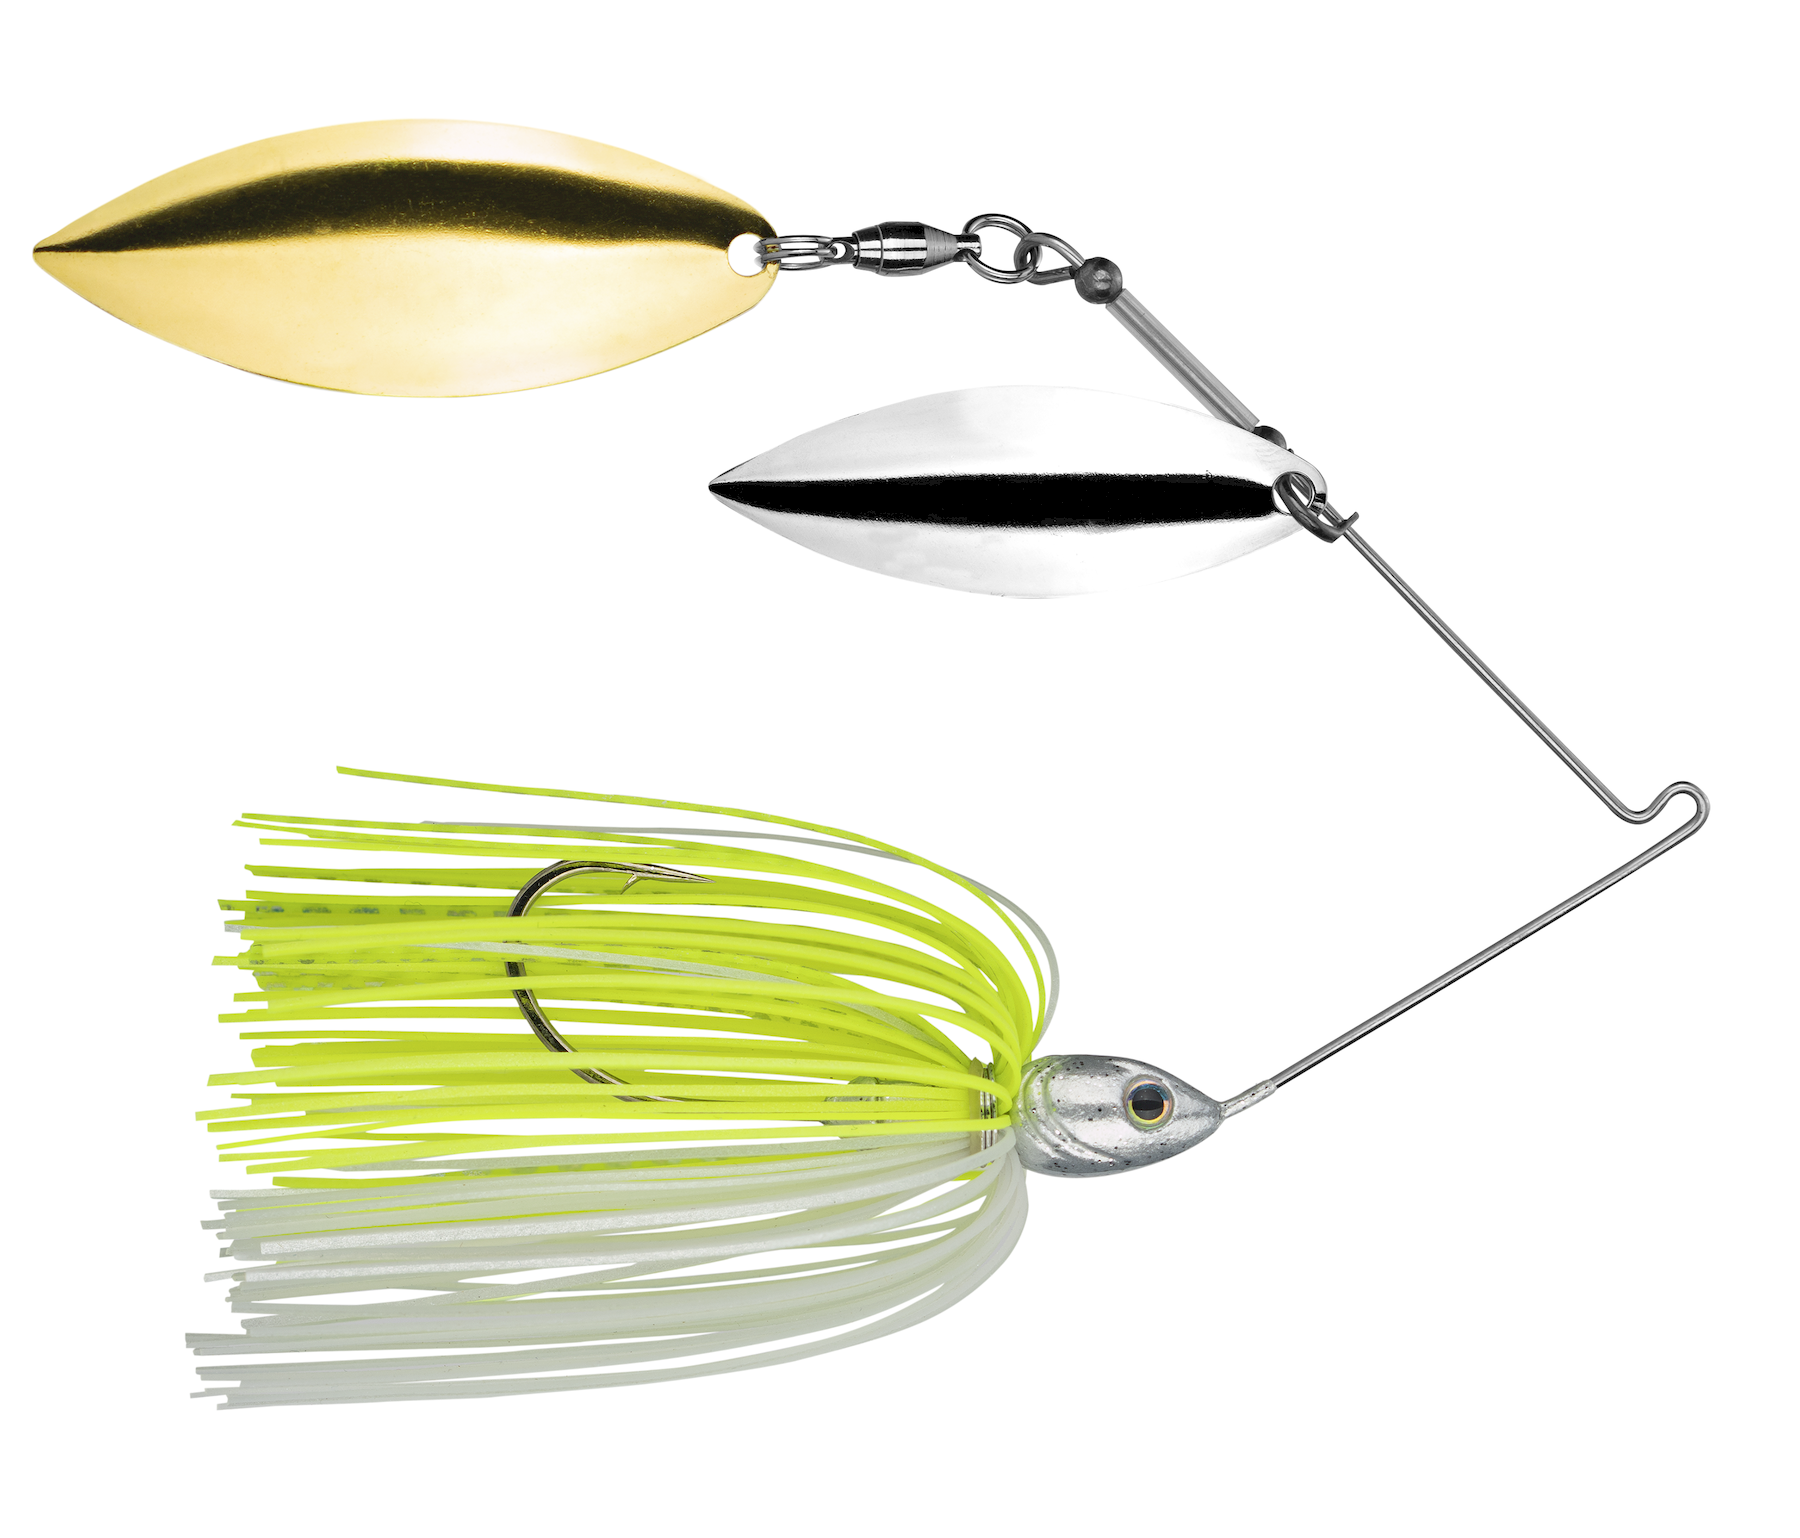 Fire Tiger Spinnerbait - Chartreuse Double Willow Blades